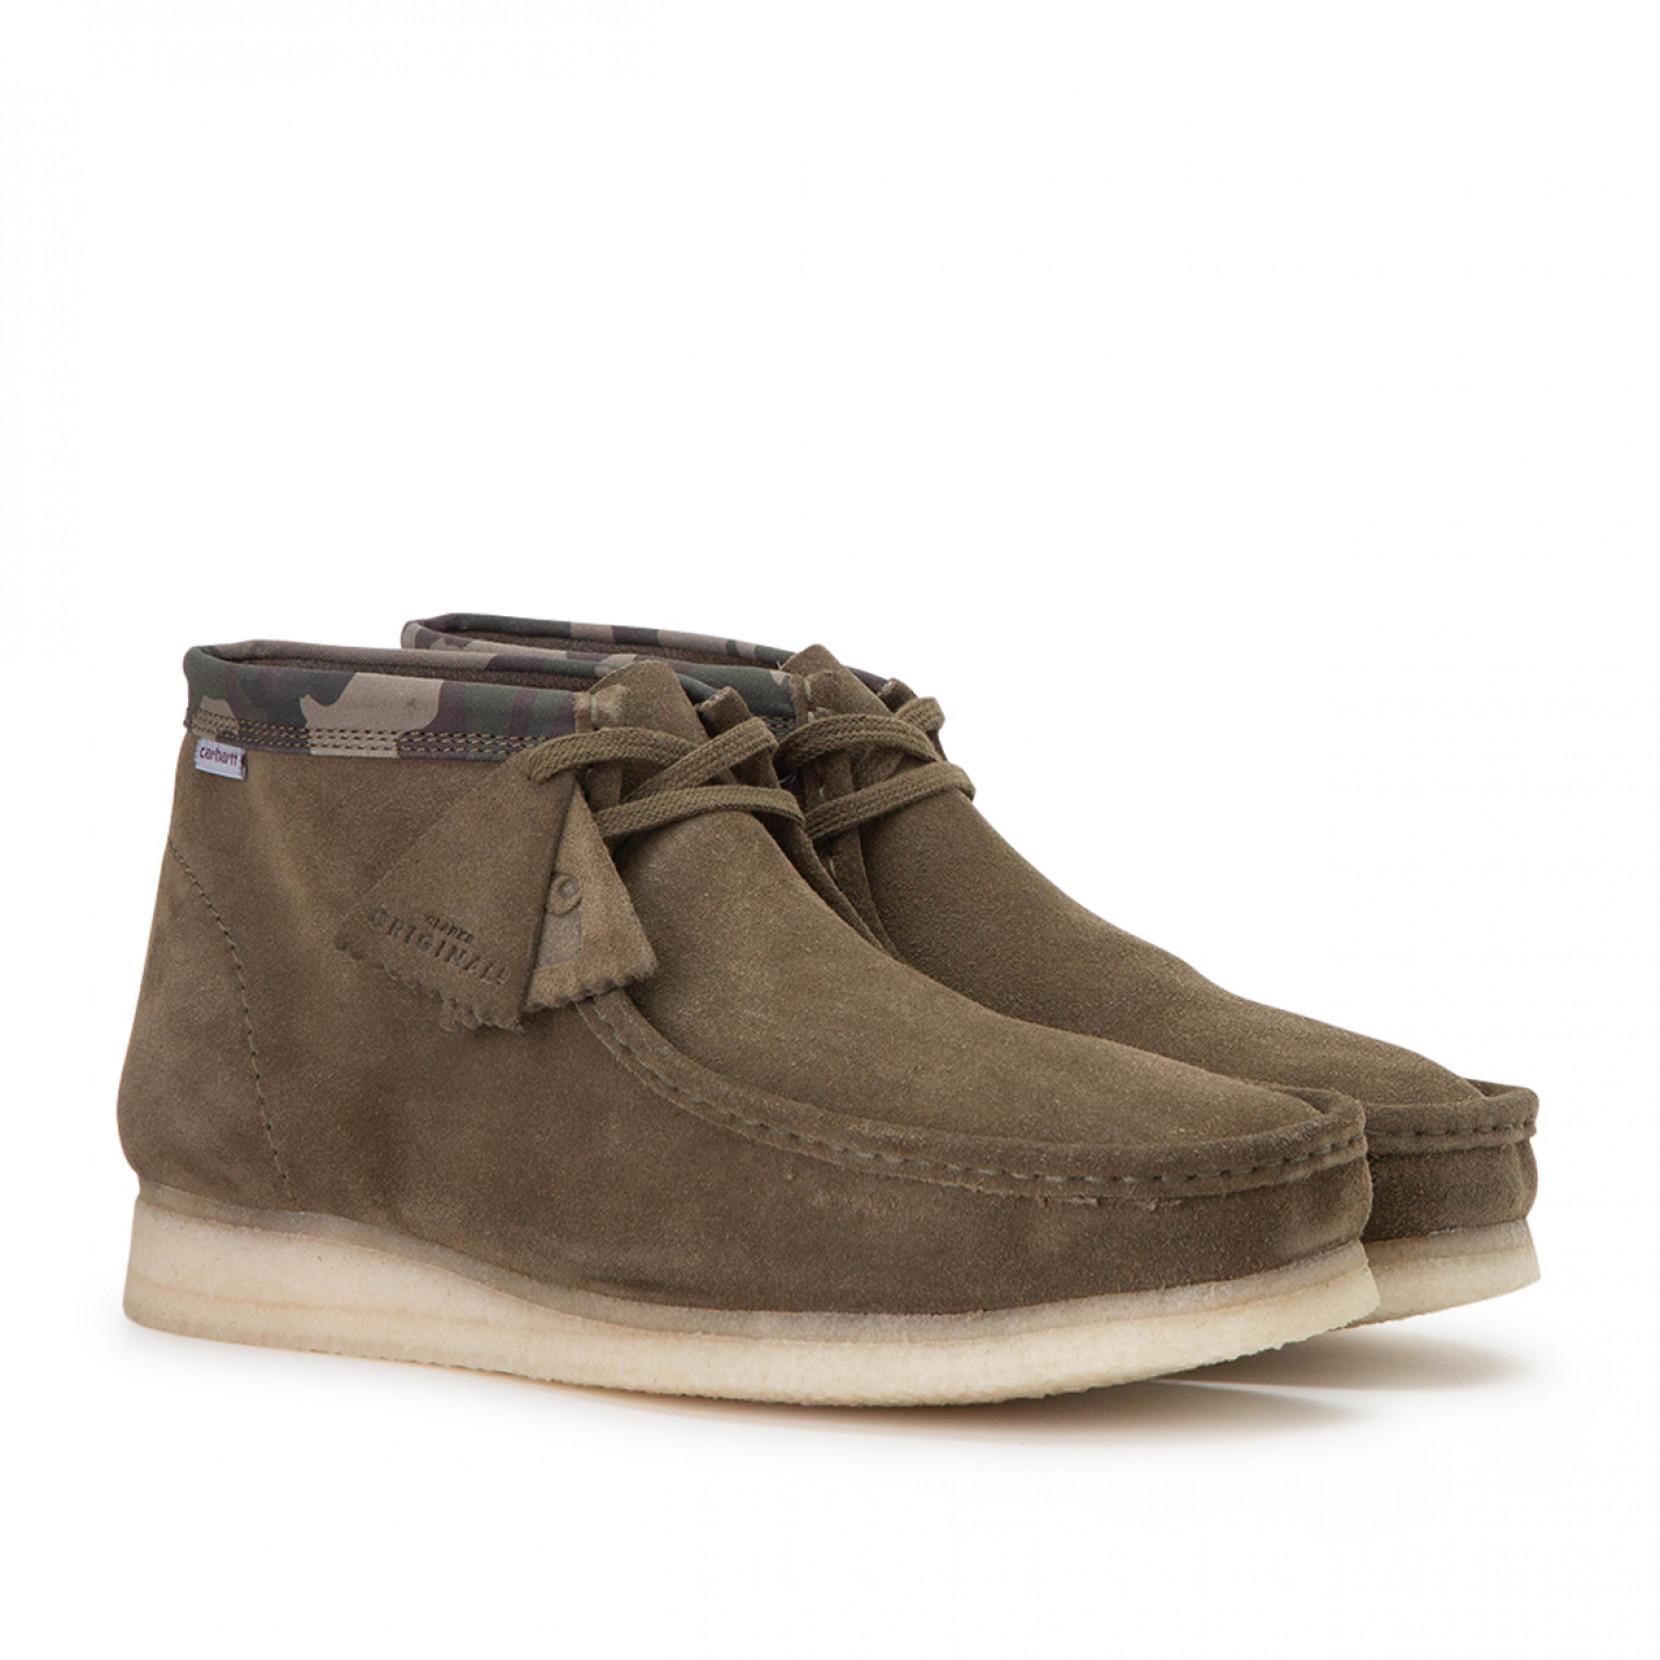 Clarks Suede X Carhartt Wallabee Boot in Olive (Green) for Men - Lyst